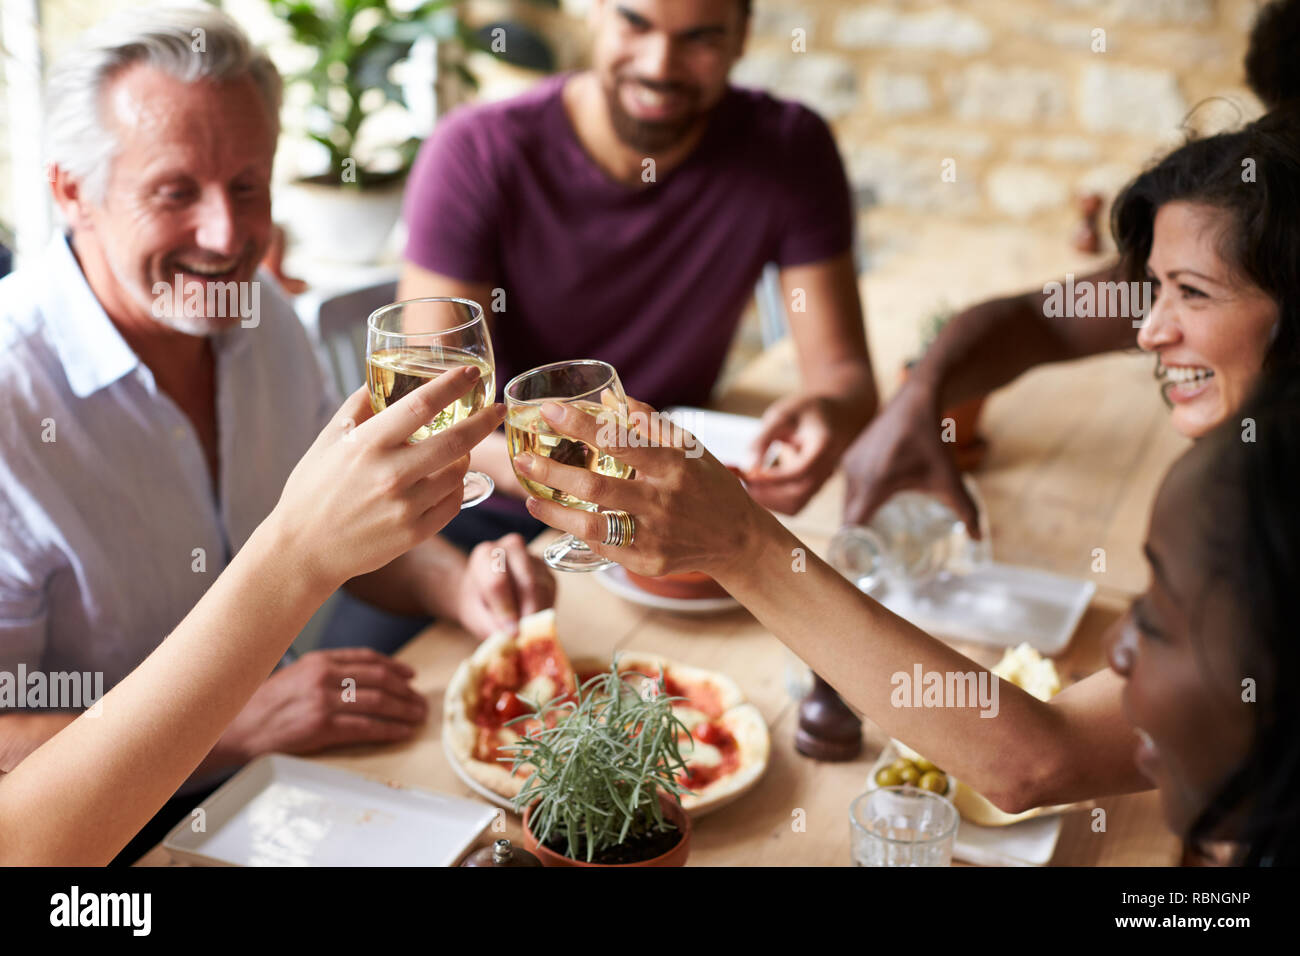 Smiling friends eating at a table in a cafe making a toast Stock Photo